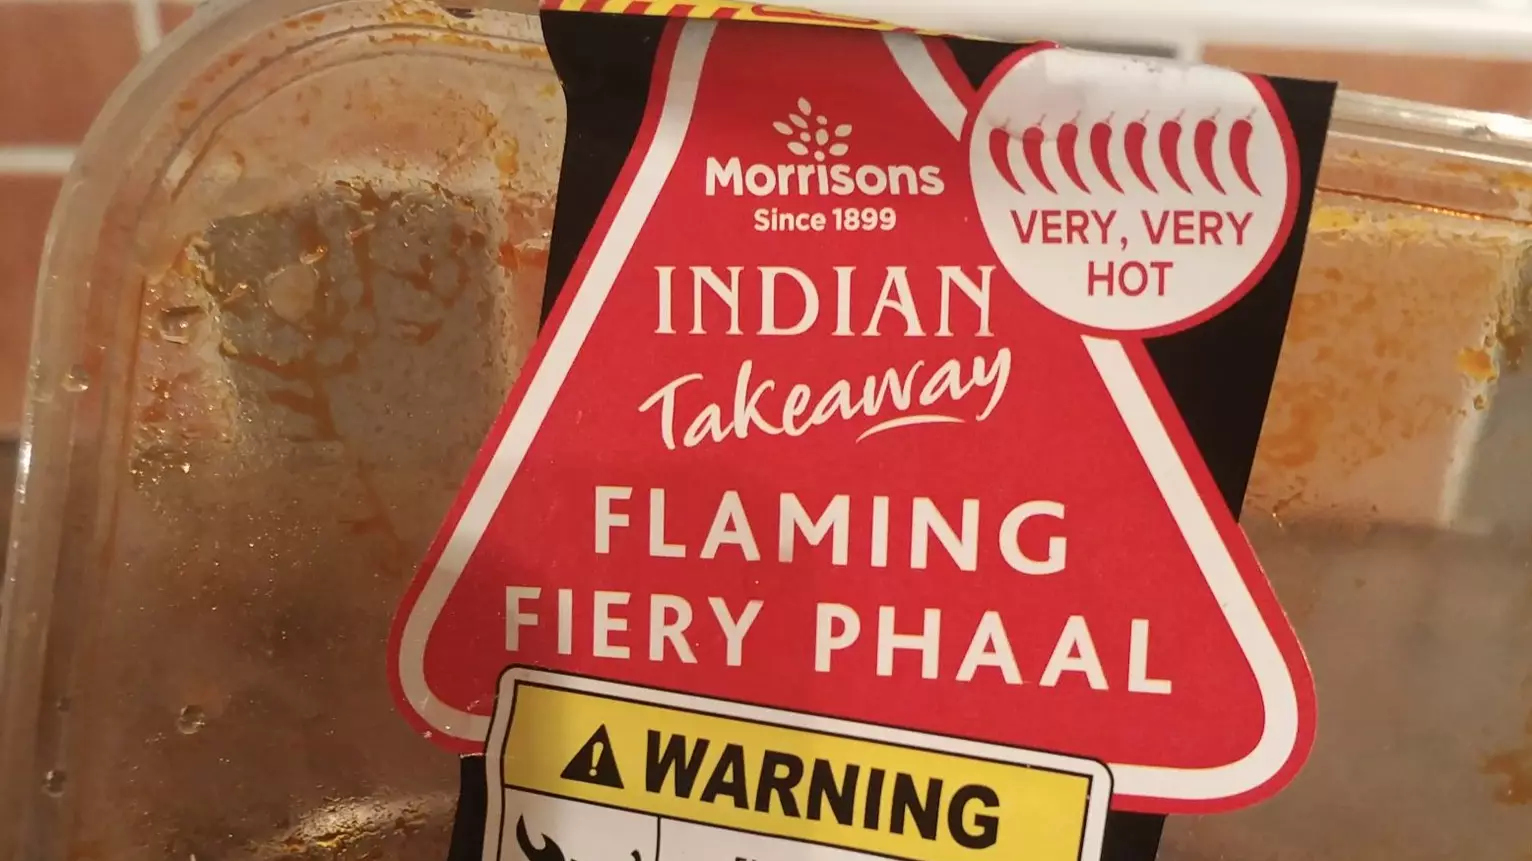 Man Eats Morrisons 'Flaming Fiery Phaal' Curry, Really Regrets Decision